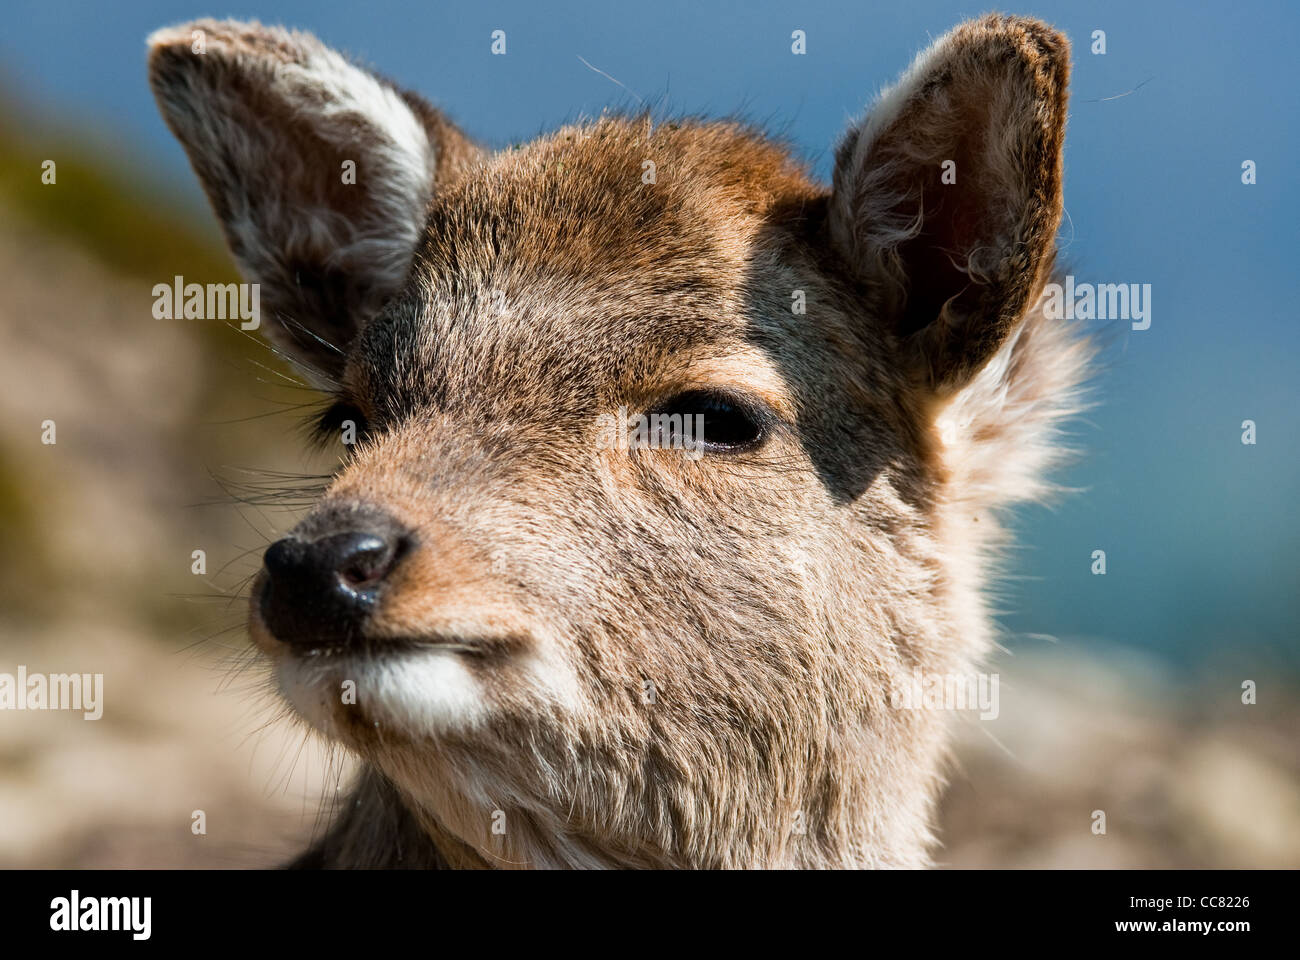 sika deer fawn (lat. Cervus nippon), focus is on the eyes Stock Photo